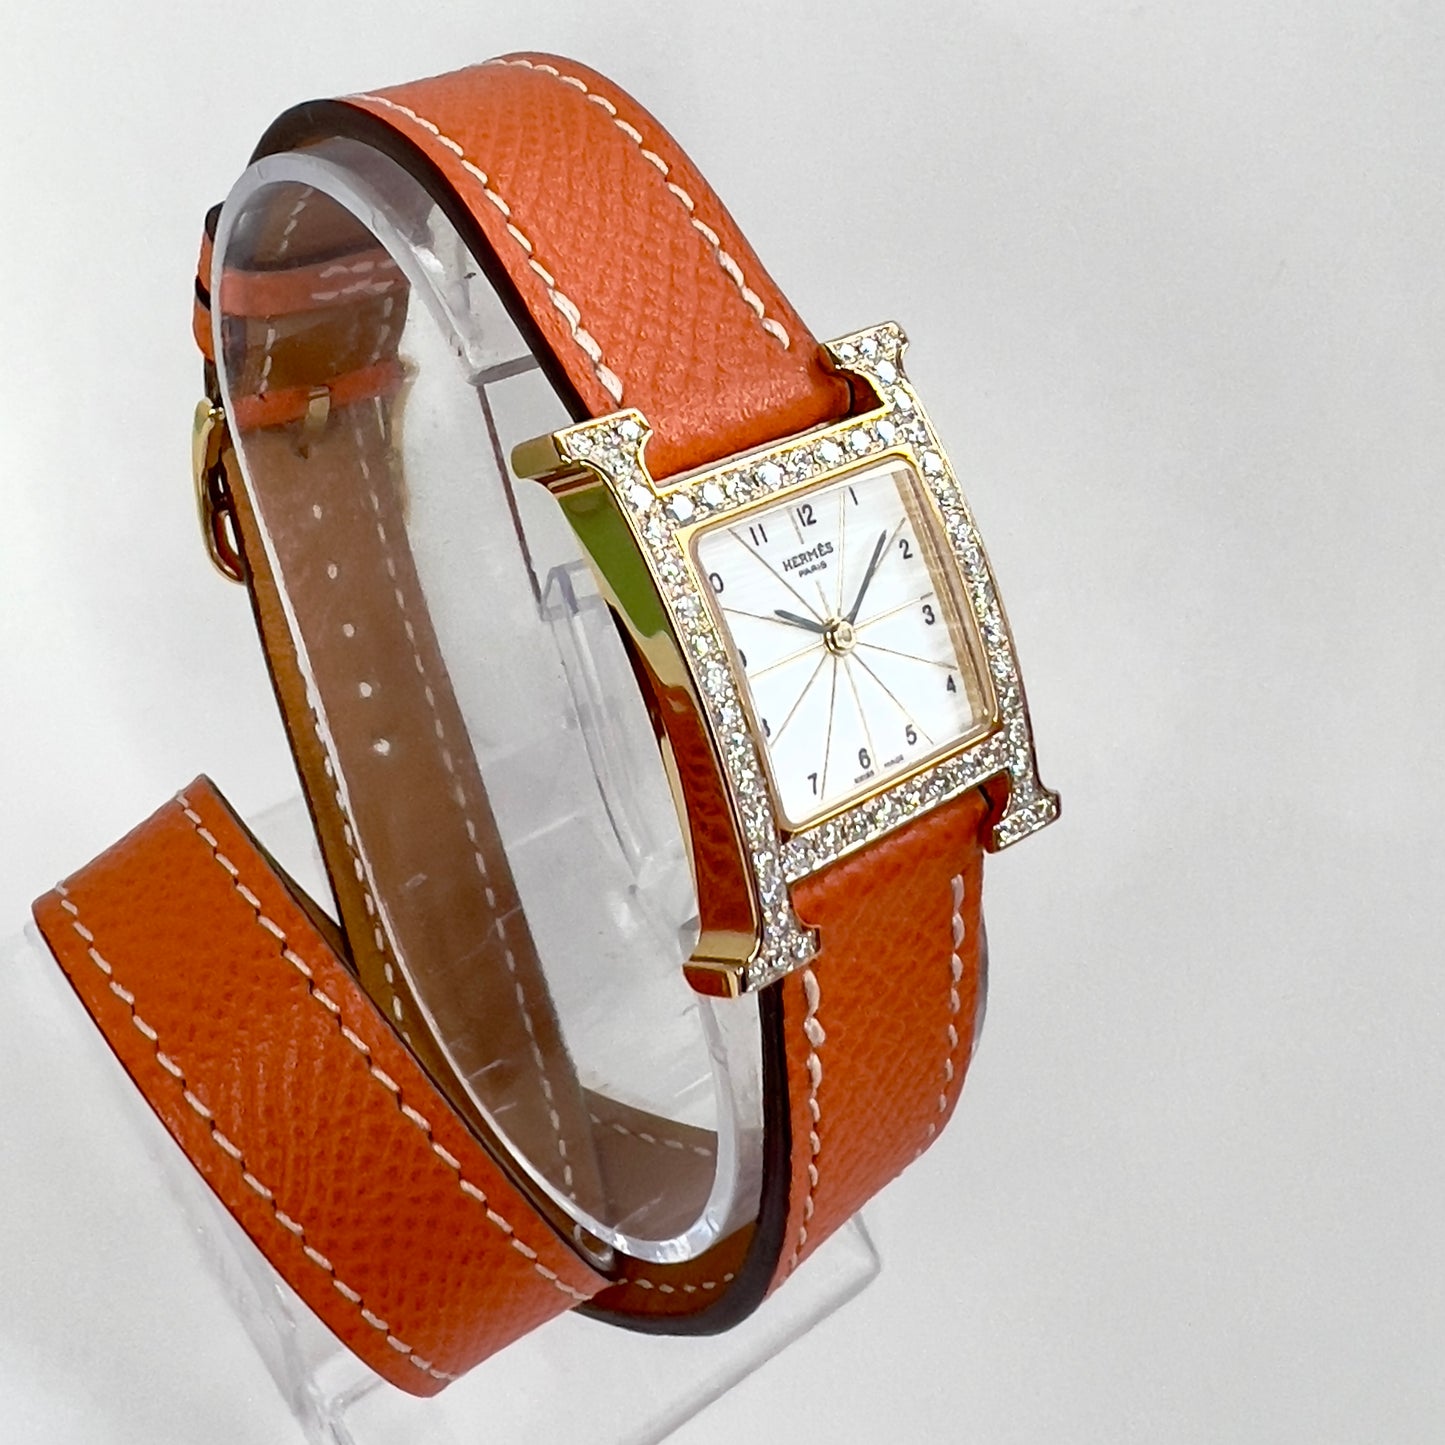 HERMES HEURE H 25mm Two Tone 0.91TCW DIAMONDS Hermes Double Tour Band  Watch